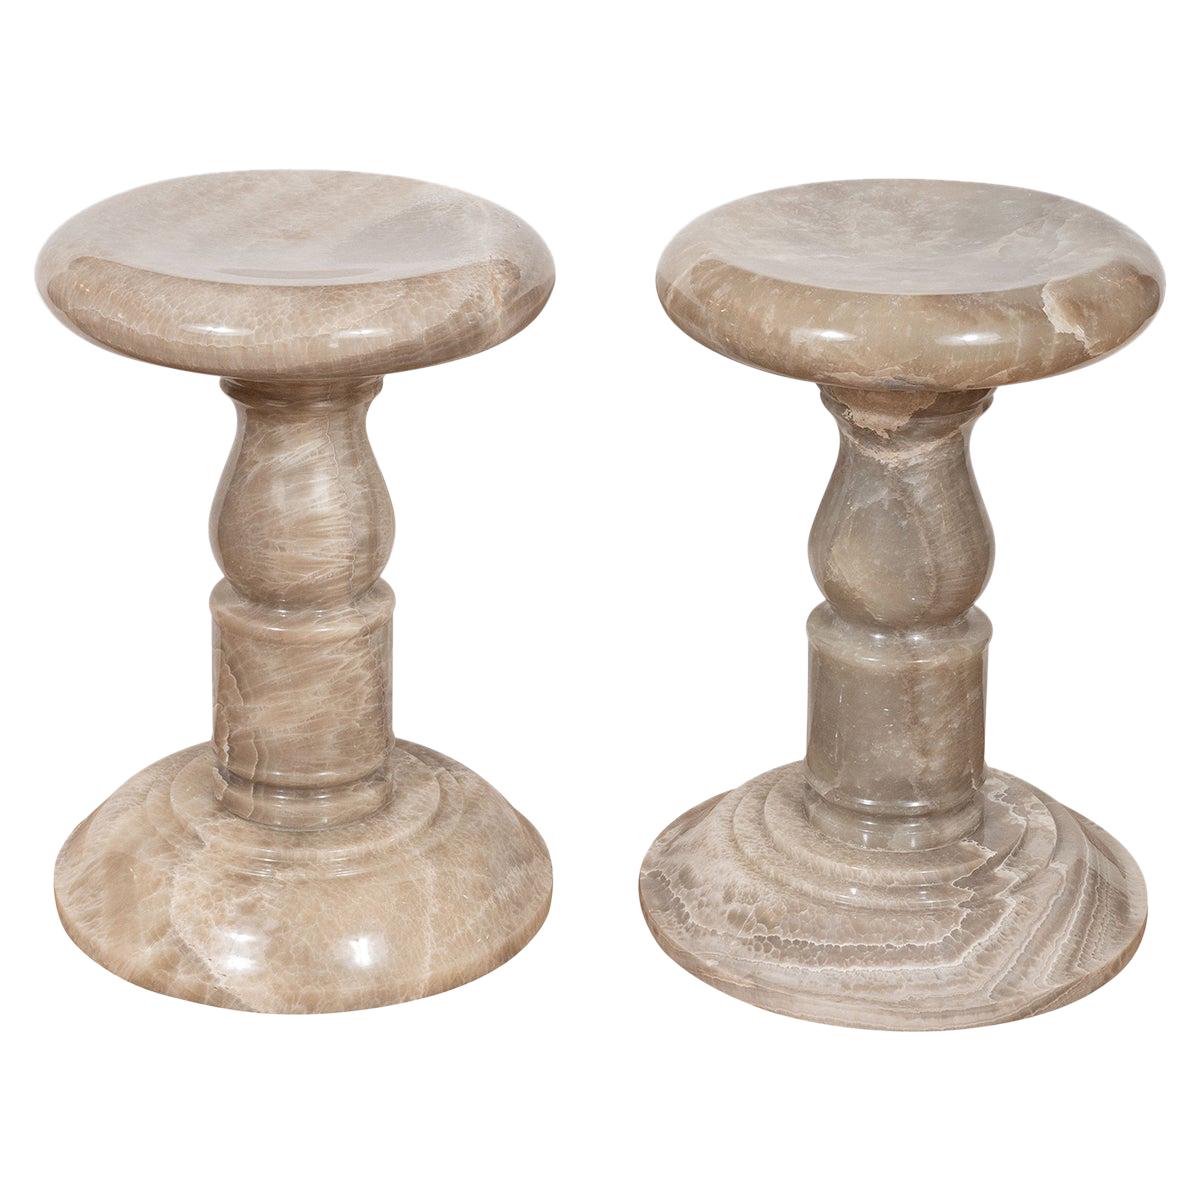 Pair of Spindle Form Onyx Stools